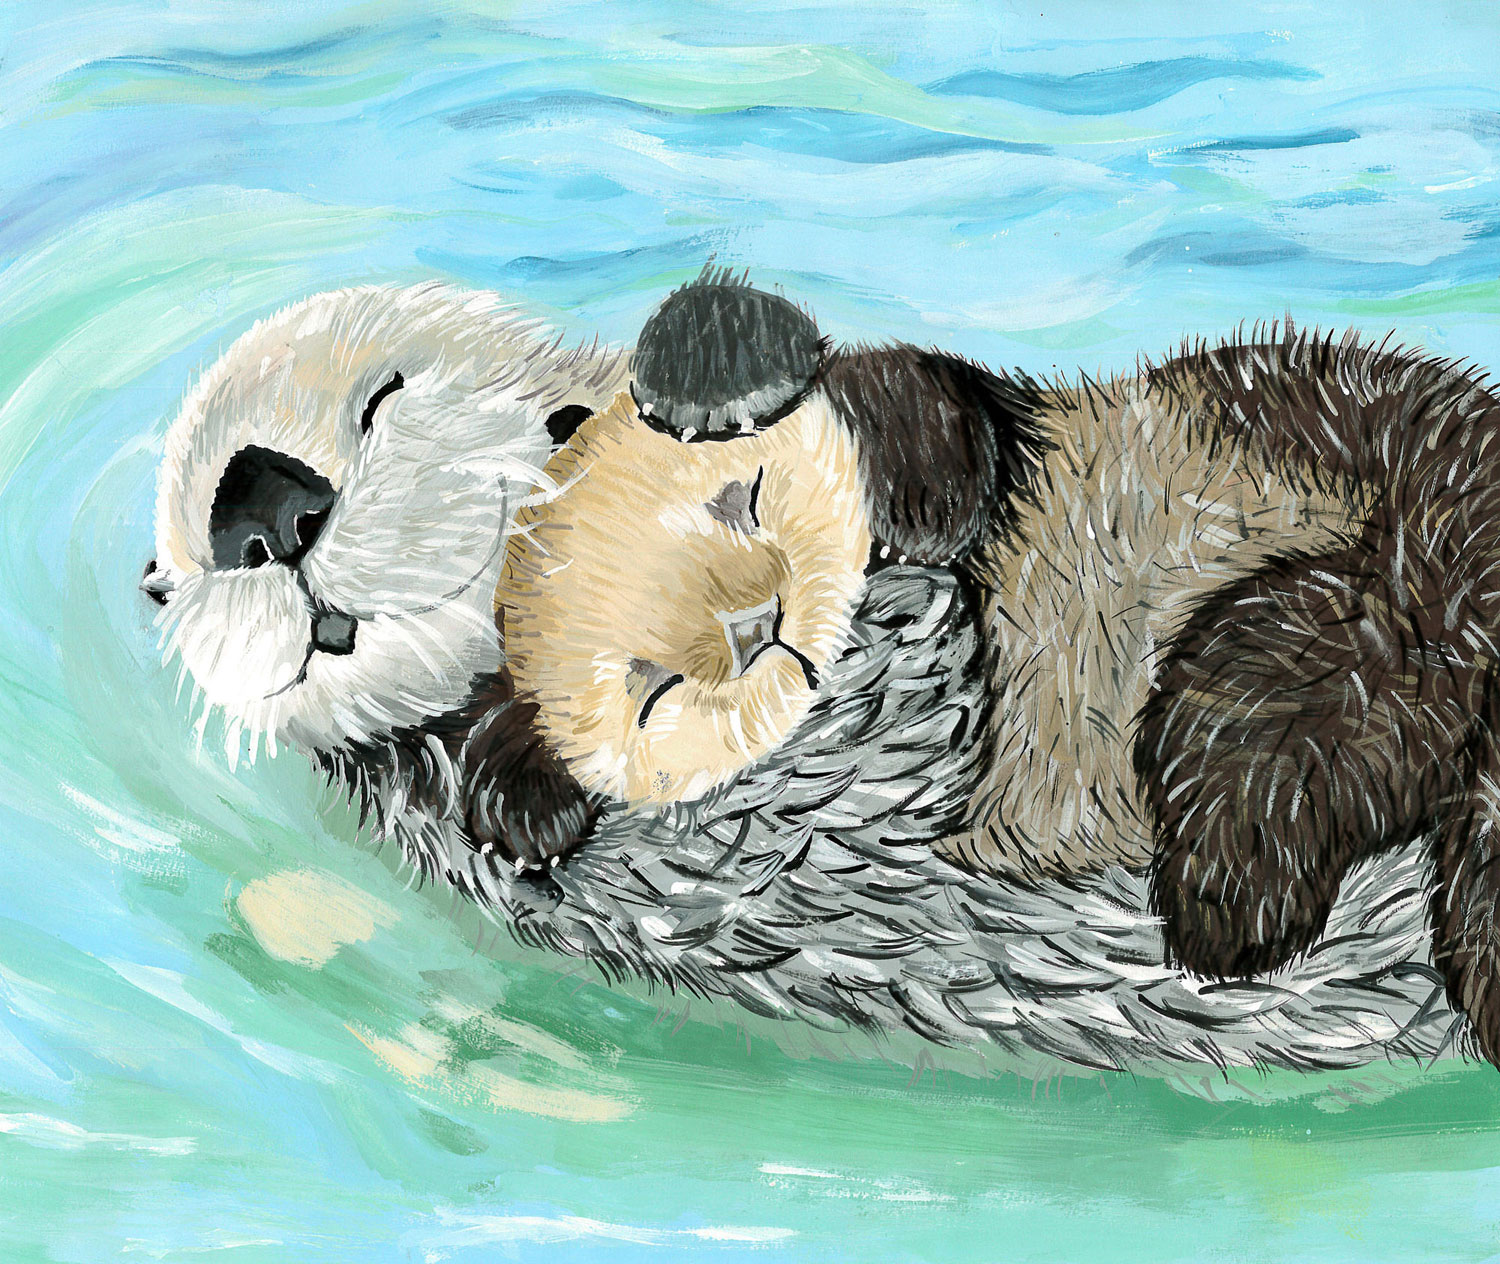 Mother otter holding her baby, in tempera paint